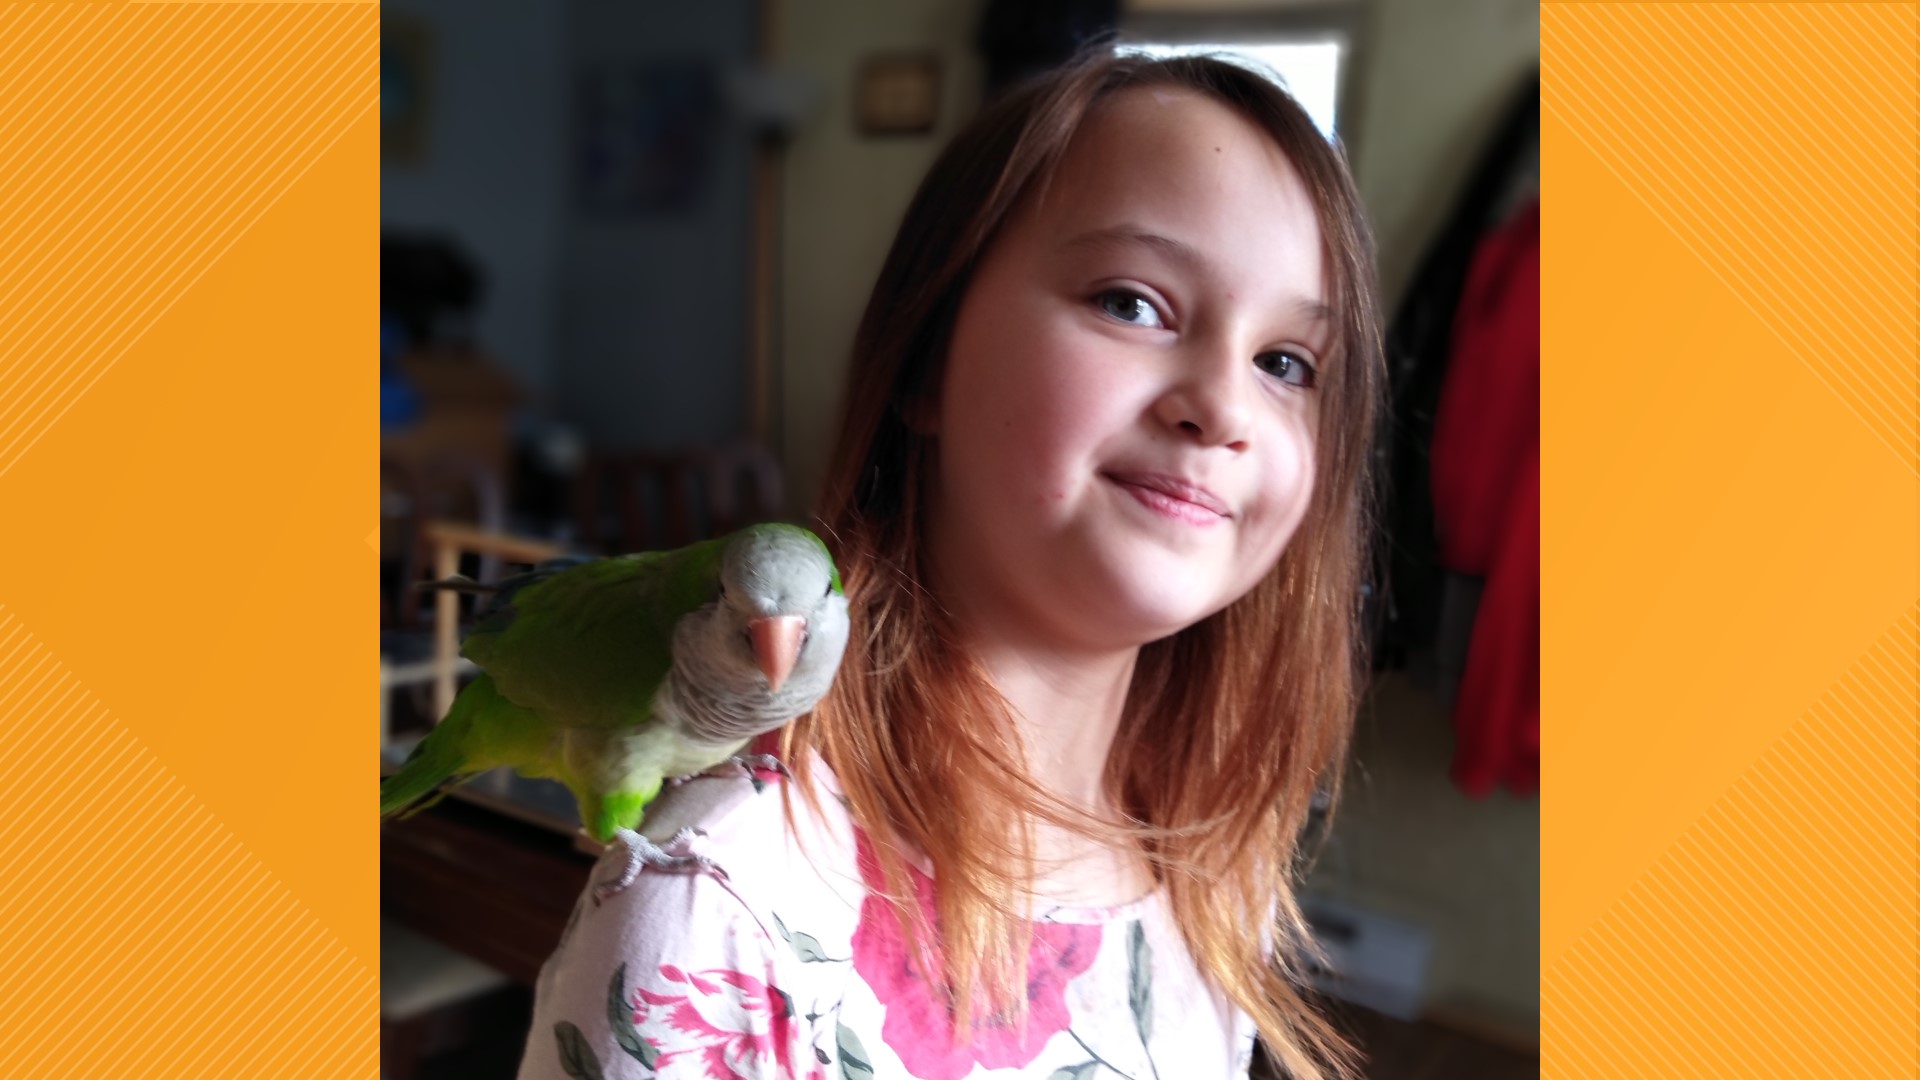 A nine-year-old girl in Plymouth has become quite the bird expert lately, but it’s not her knowledge of her feathered friends that got our attention.